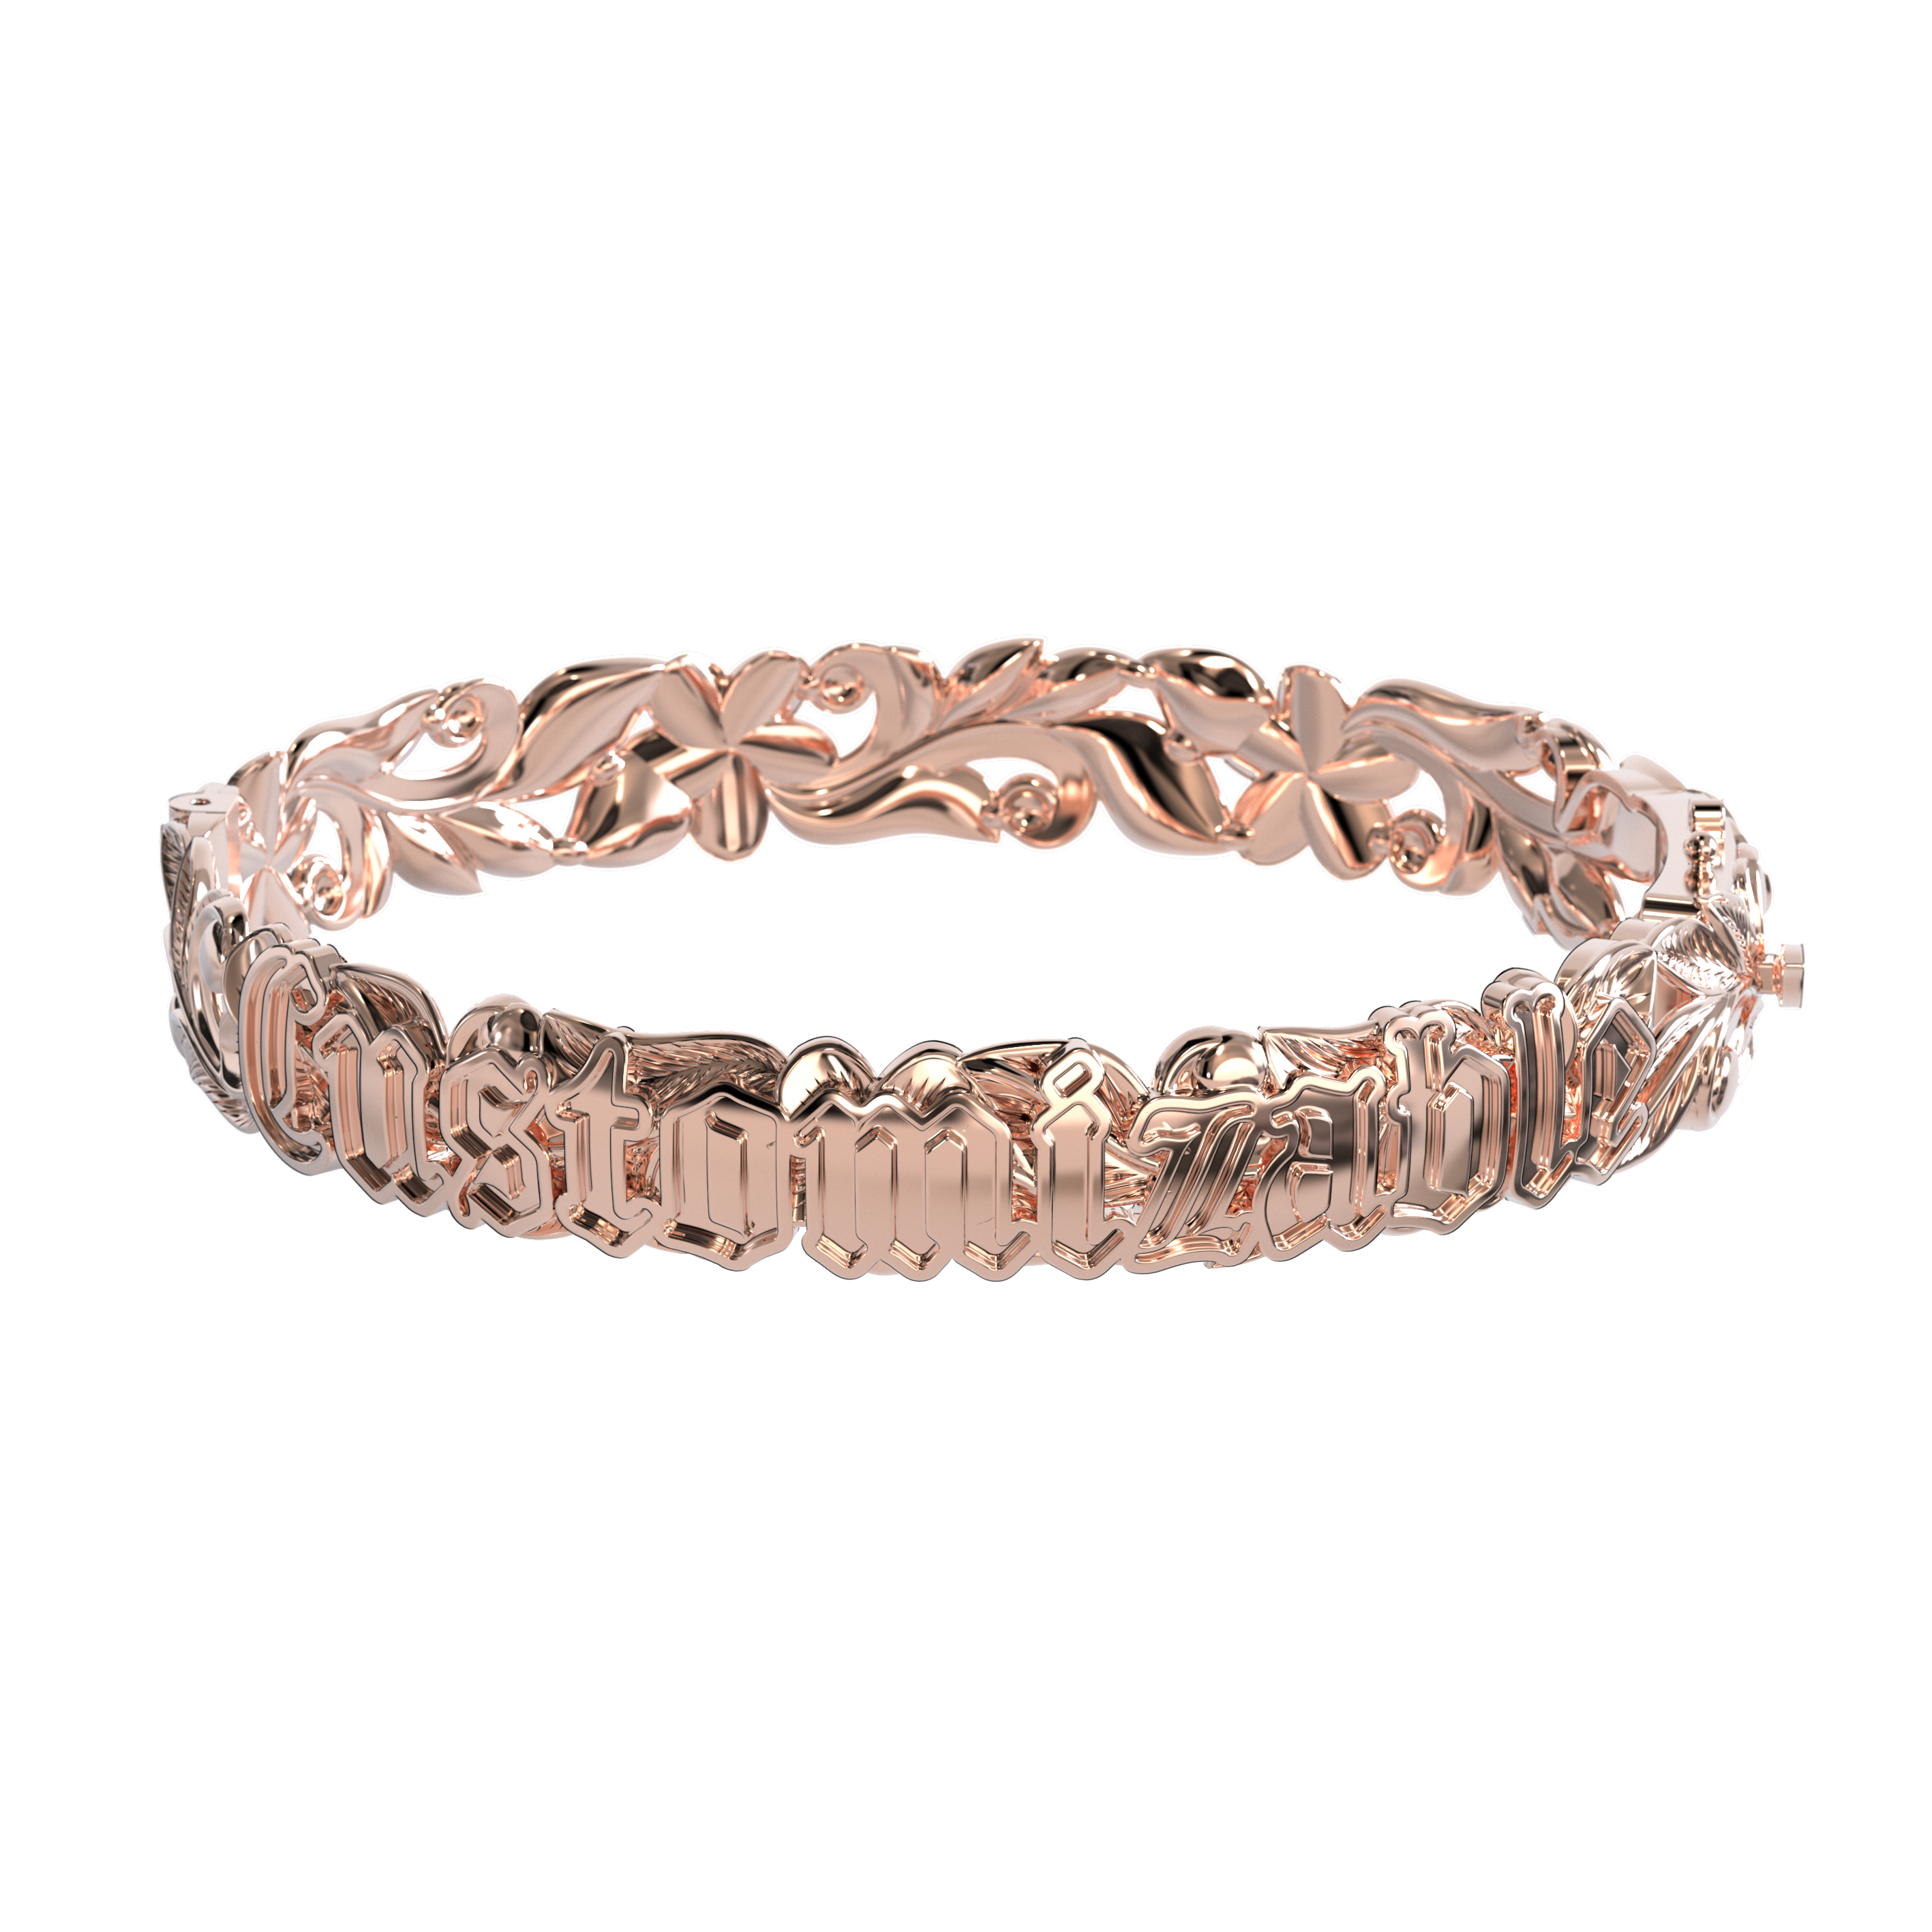 10mm Customizable Hawaiian Hinge Bracelet with Raised Lettering in Rose Gold